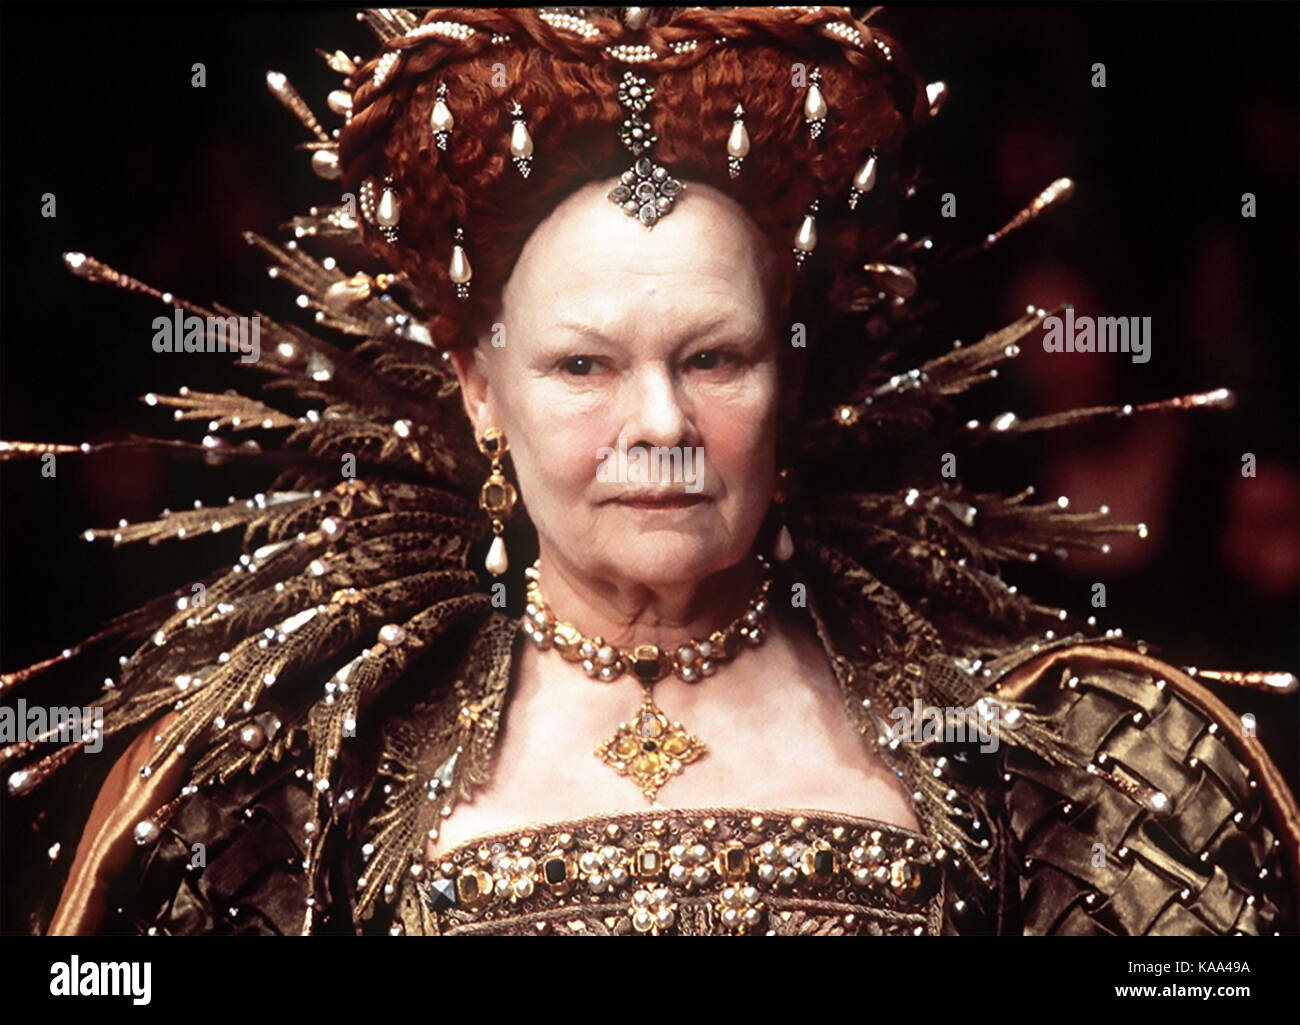 SHAKESPEARE IN AMORE 1998 Universal Pictures film con Judy Dench Foto Stock